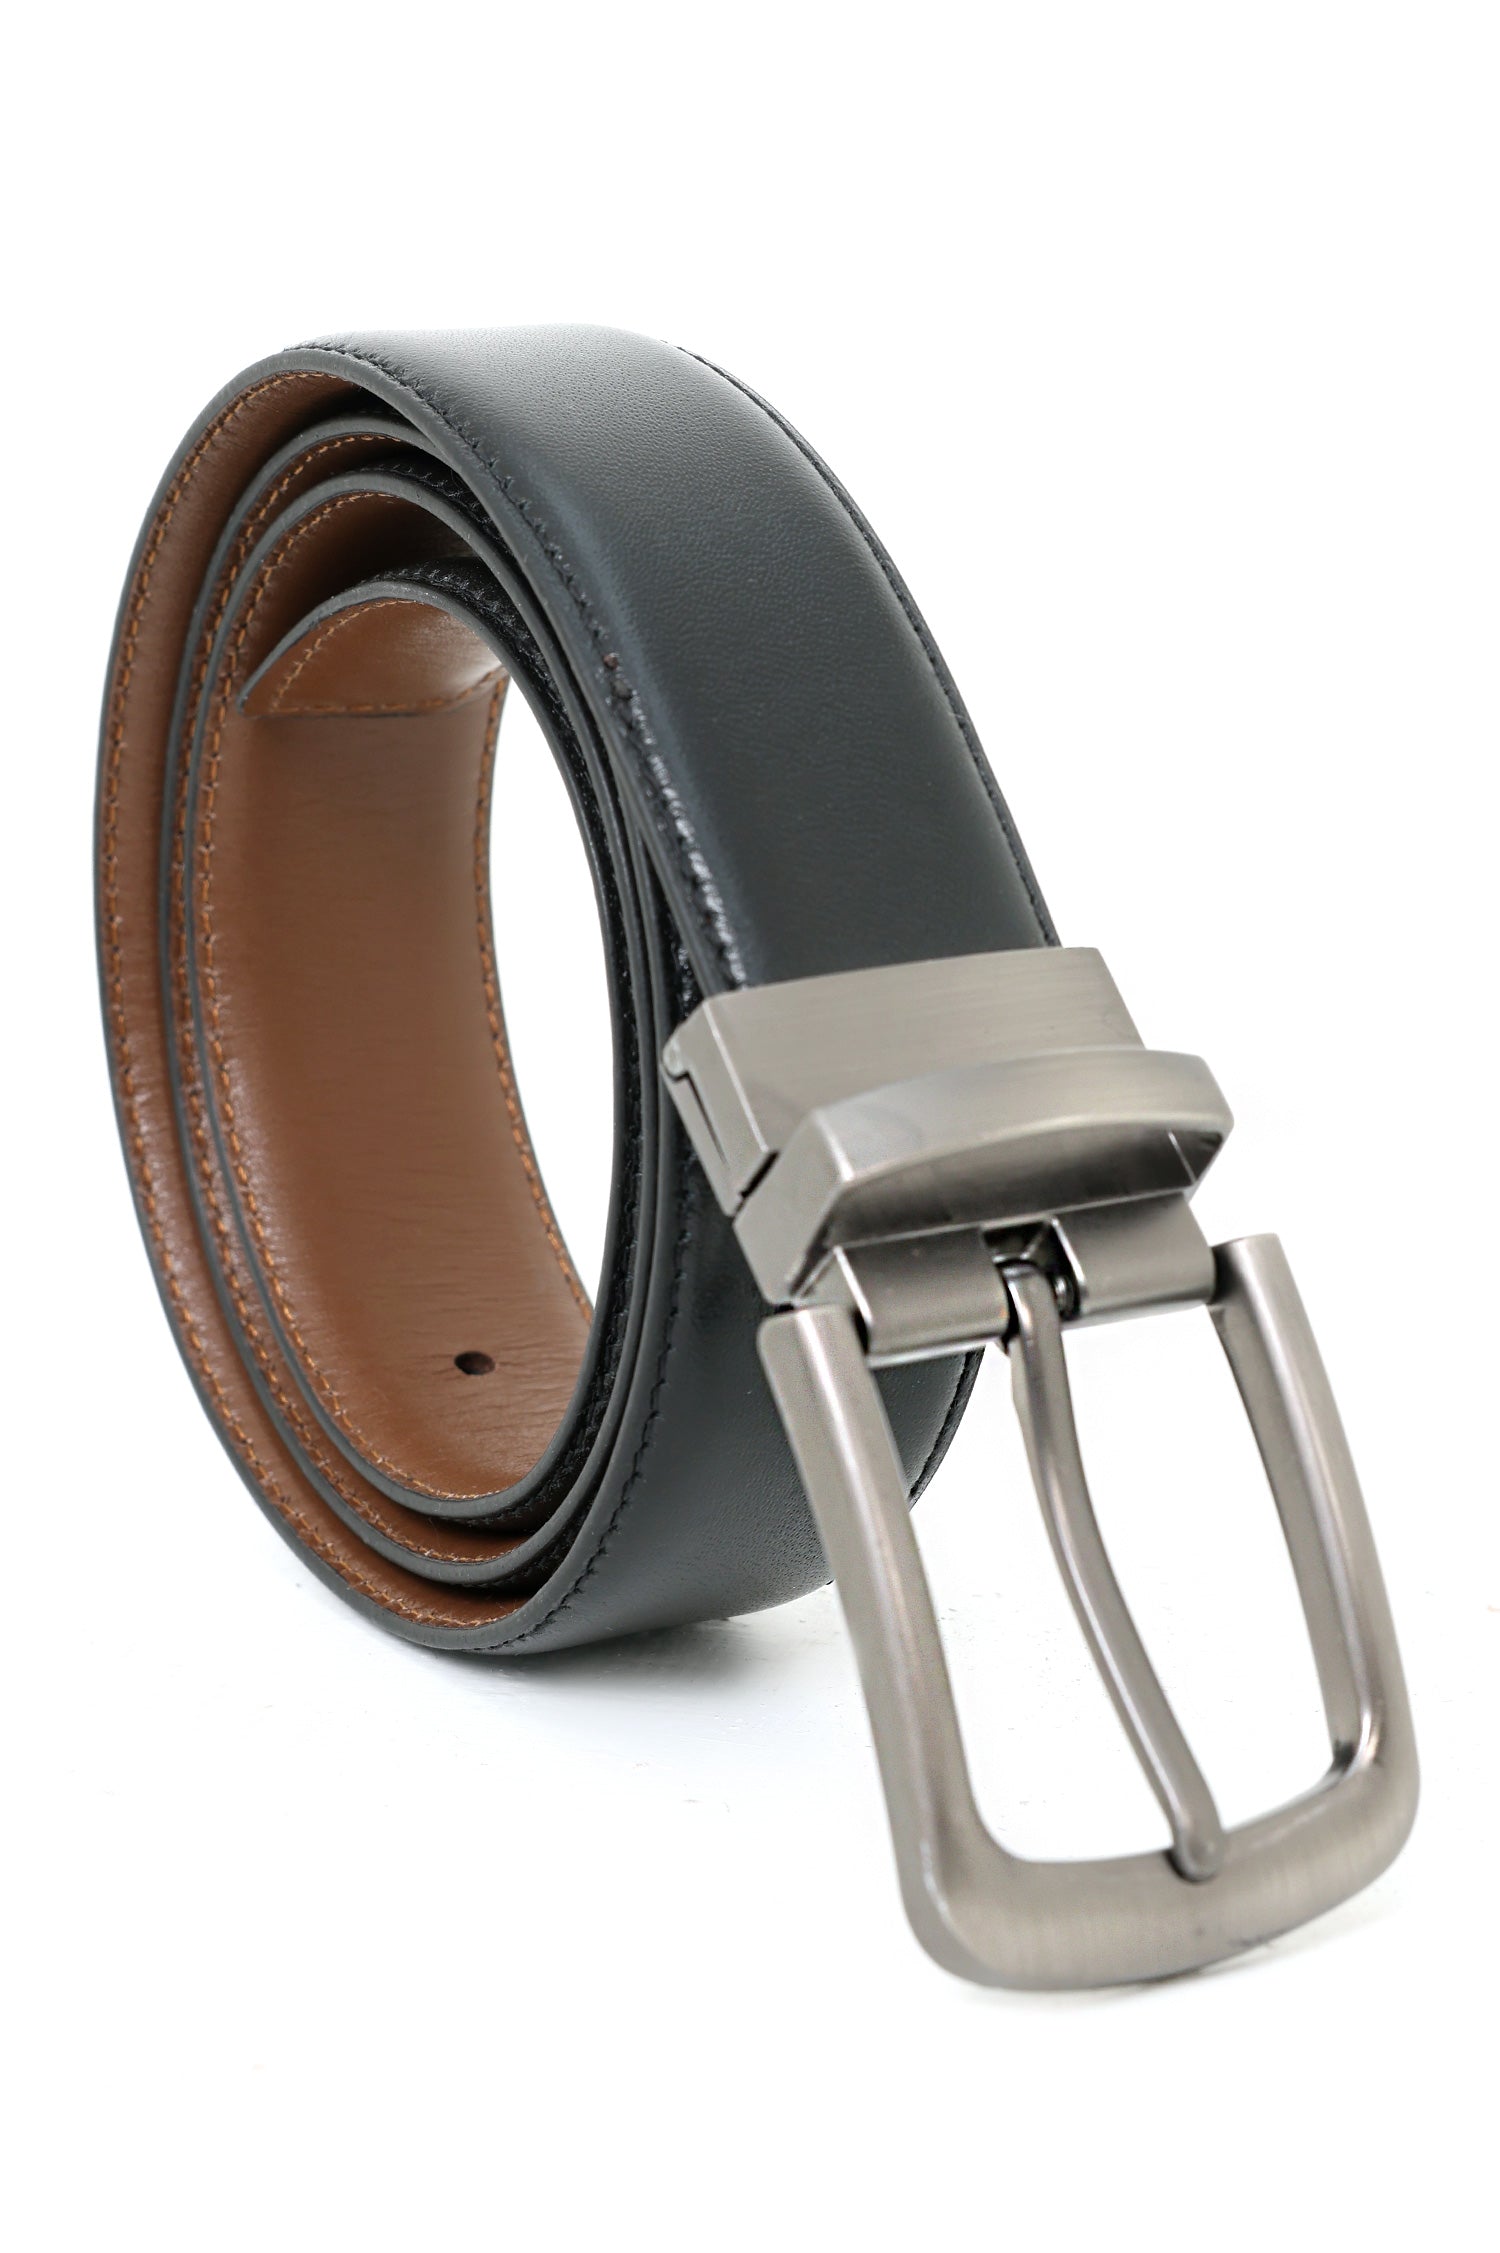 CLASSIC LEATHER BELT-BLACK-BROWN